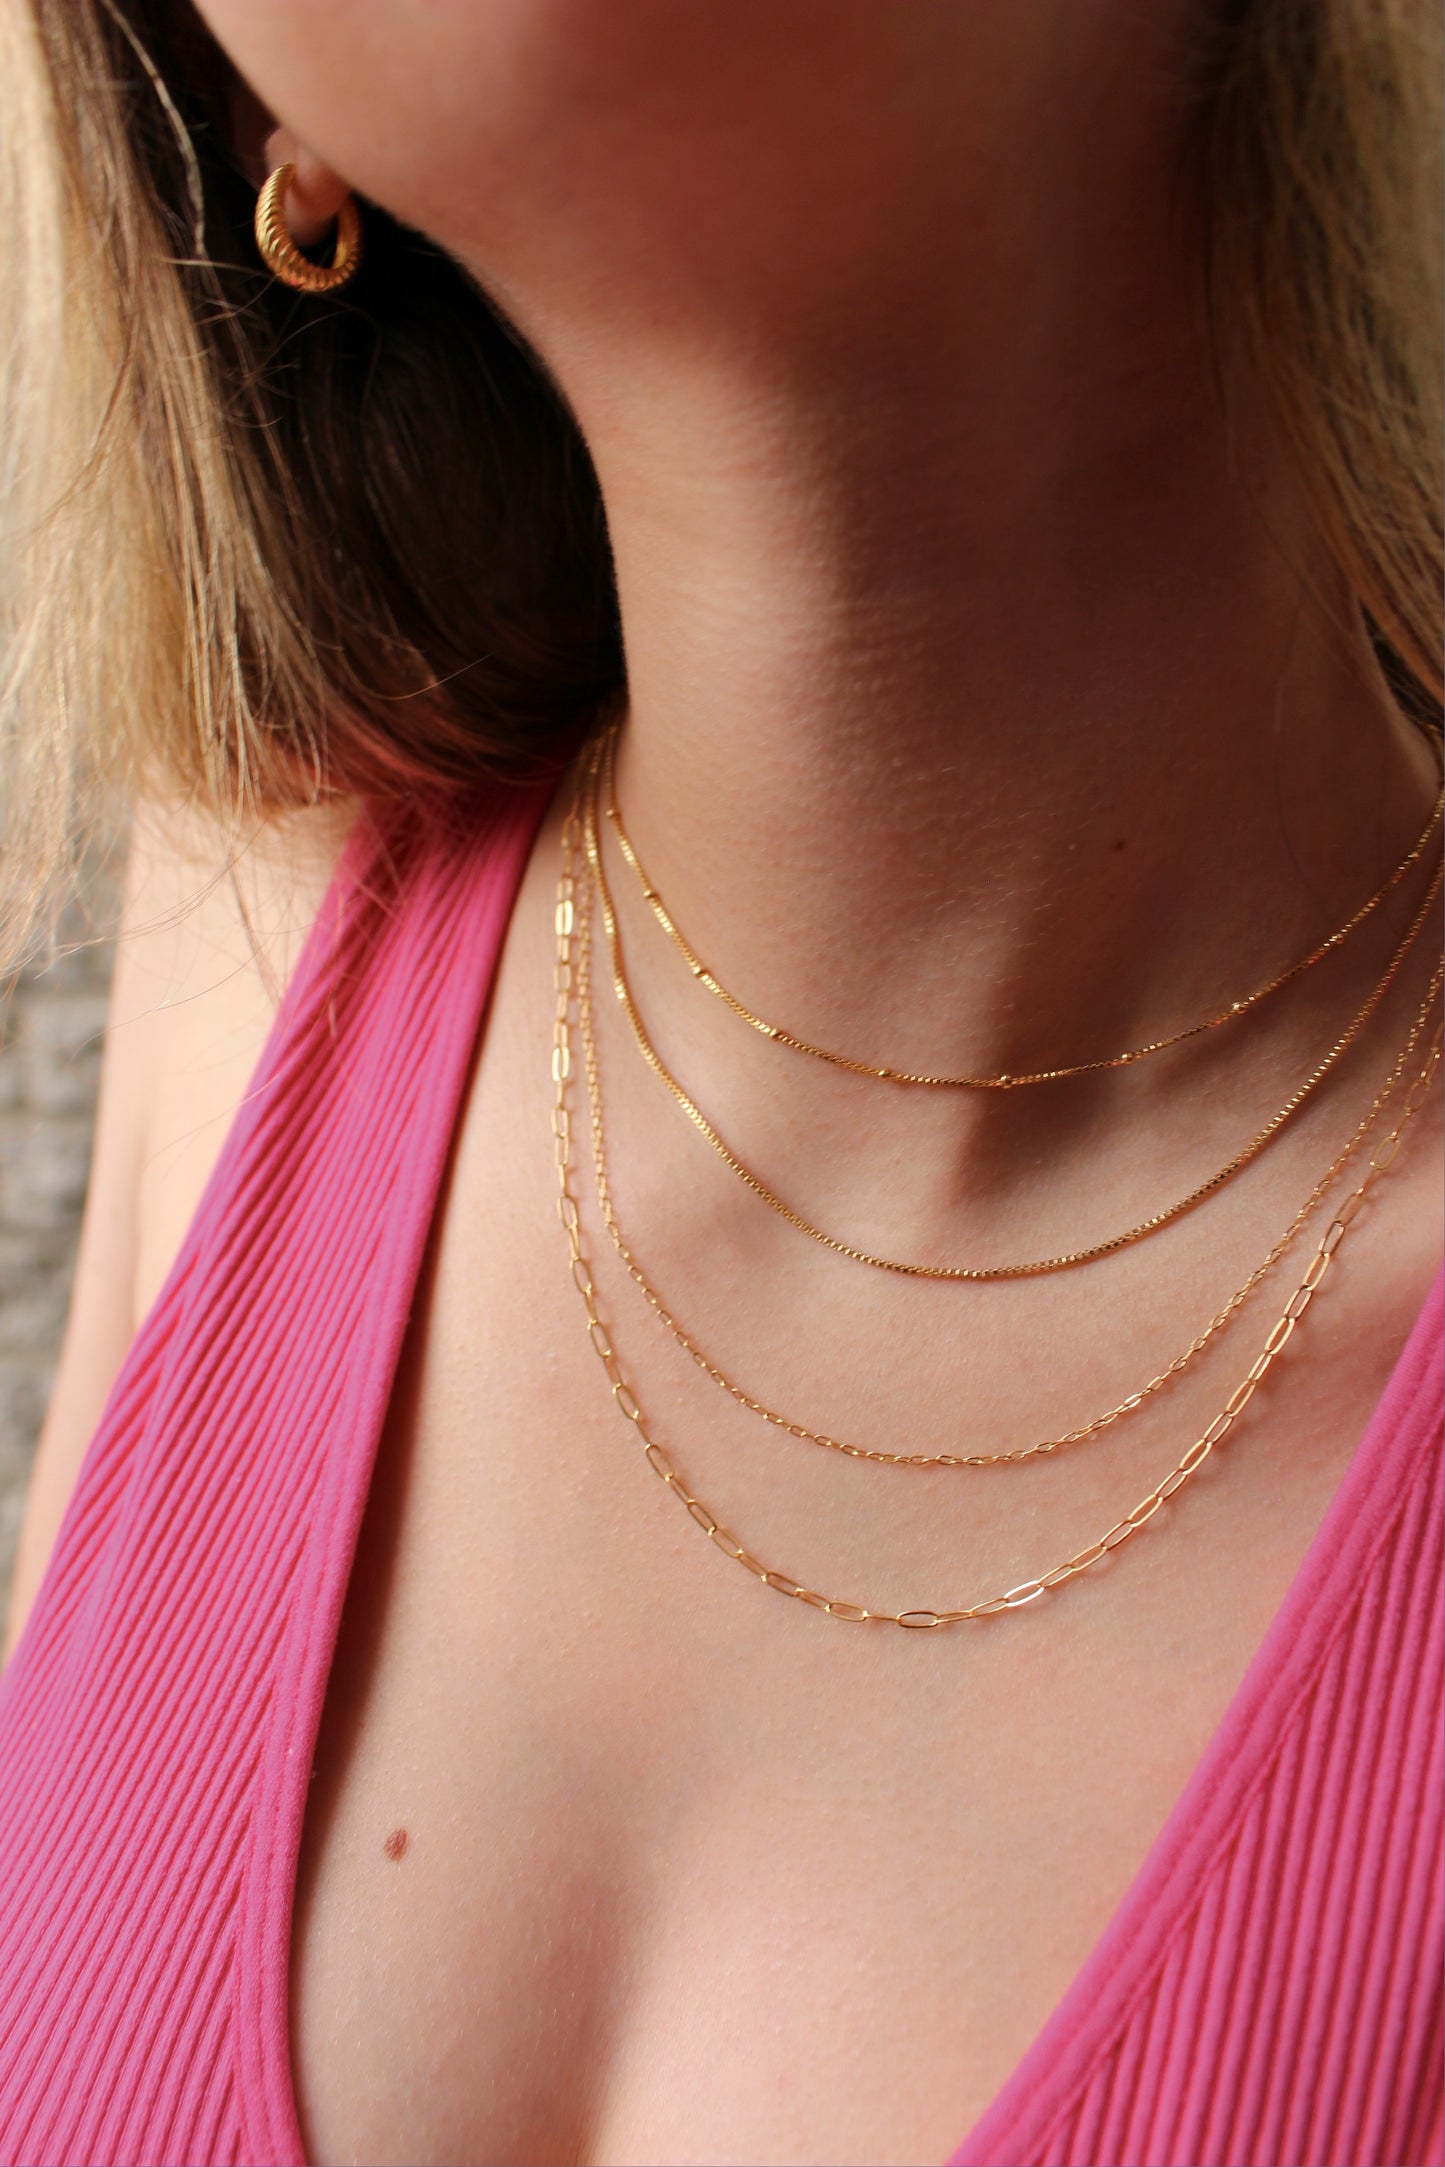 Waterproof ∙ 14k gold filled Paperclip Necklace ∙ Basic Thin Chain ∙